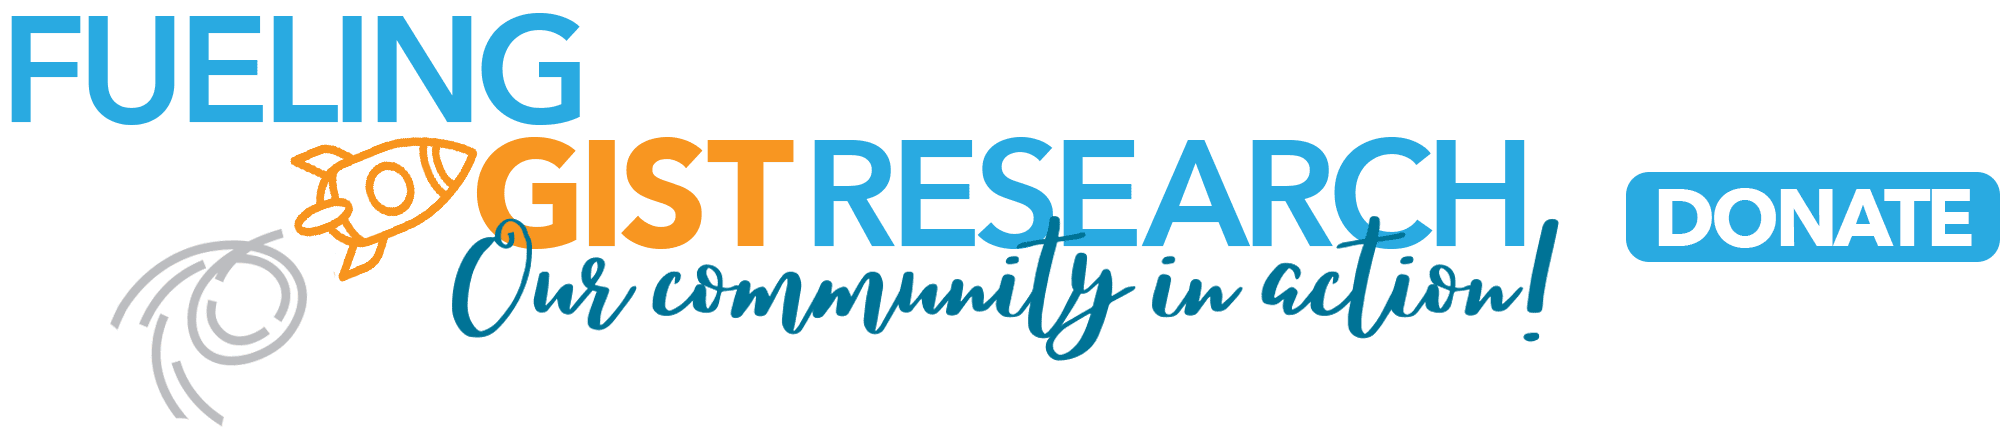 FUELING GIST RESEARCH DONATE